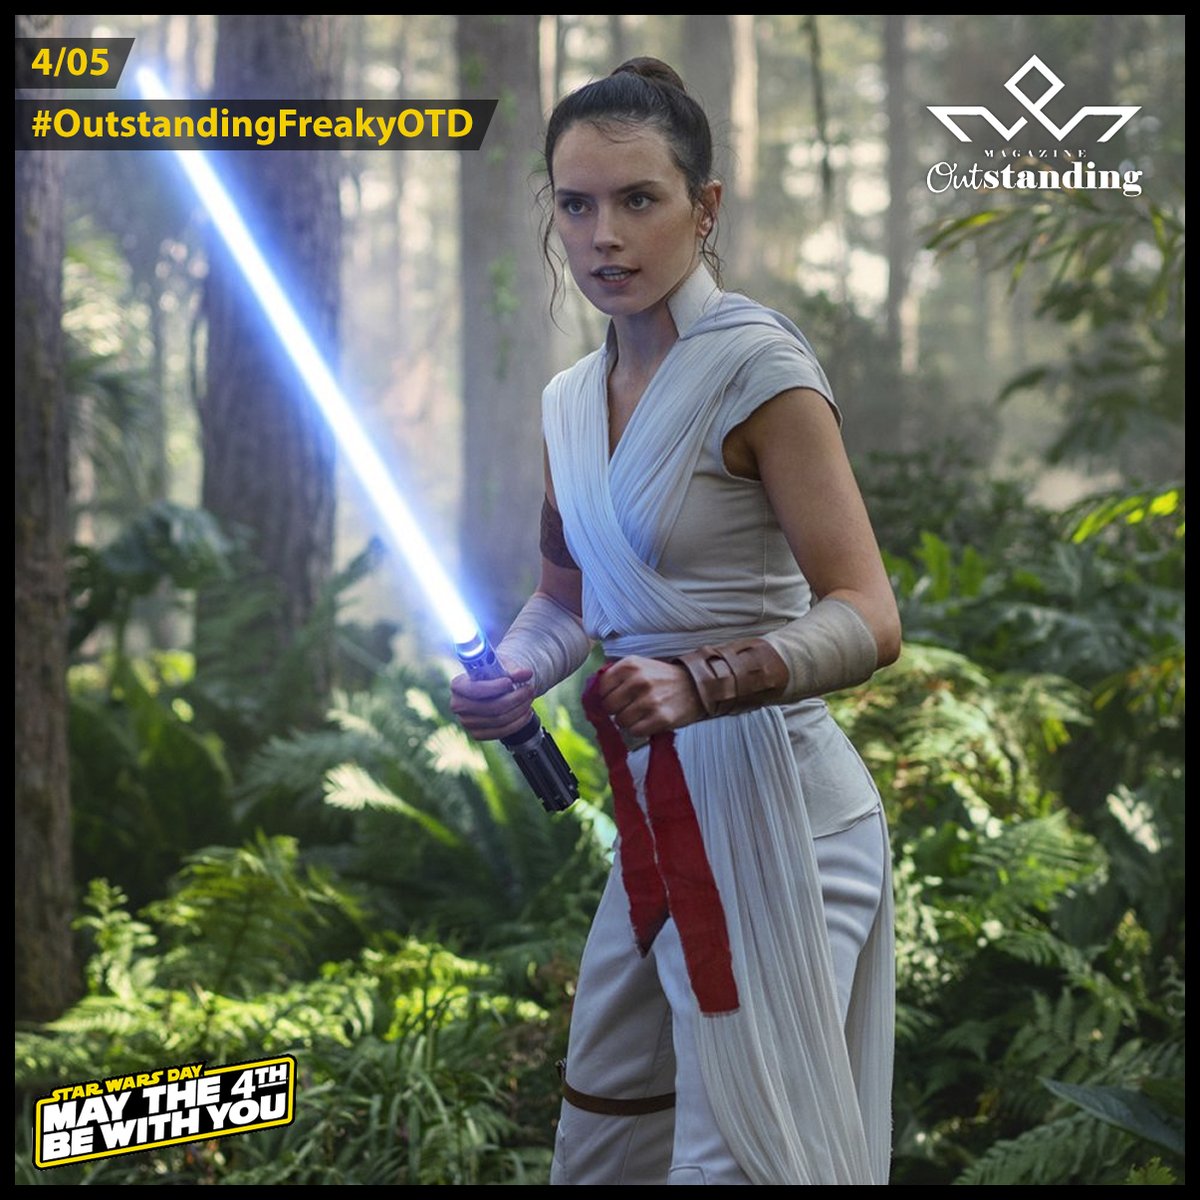 May the 4th be with you!
Daisy Ridley
1/2
#MayThe4thBeWithYou #MayThe4th #maytheforcebewithyou #StarWars #OutstandingGirl #DaisyRidley #StarWarsGirl